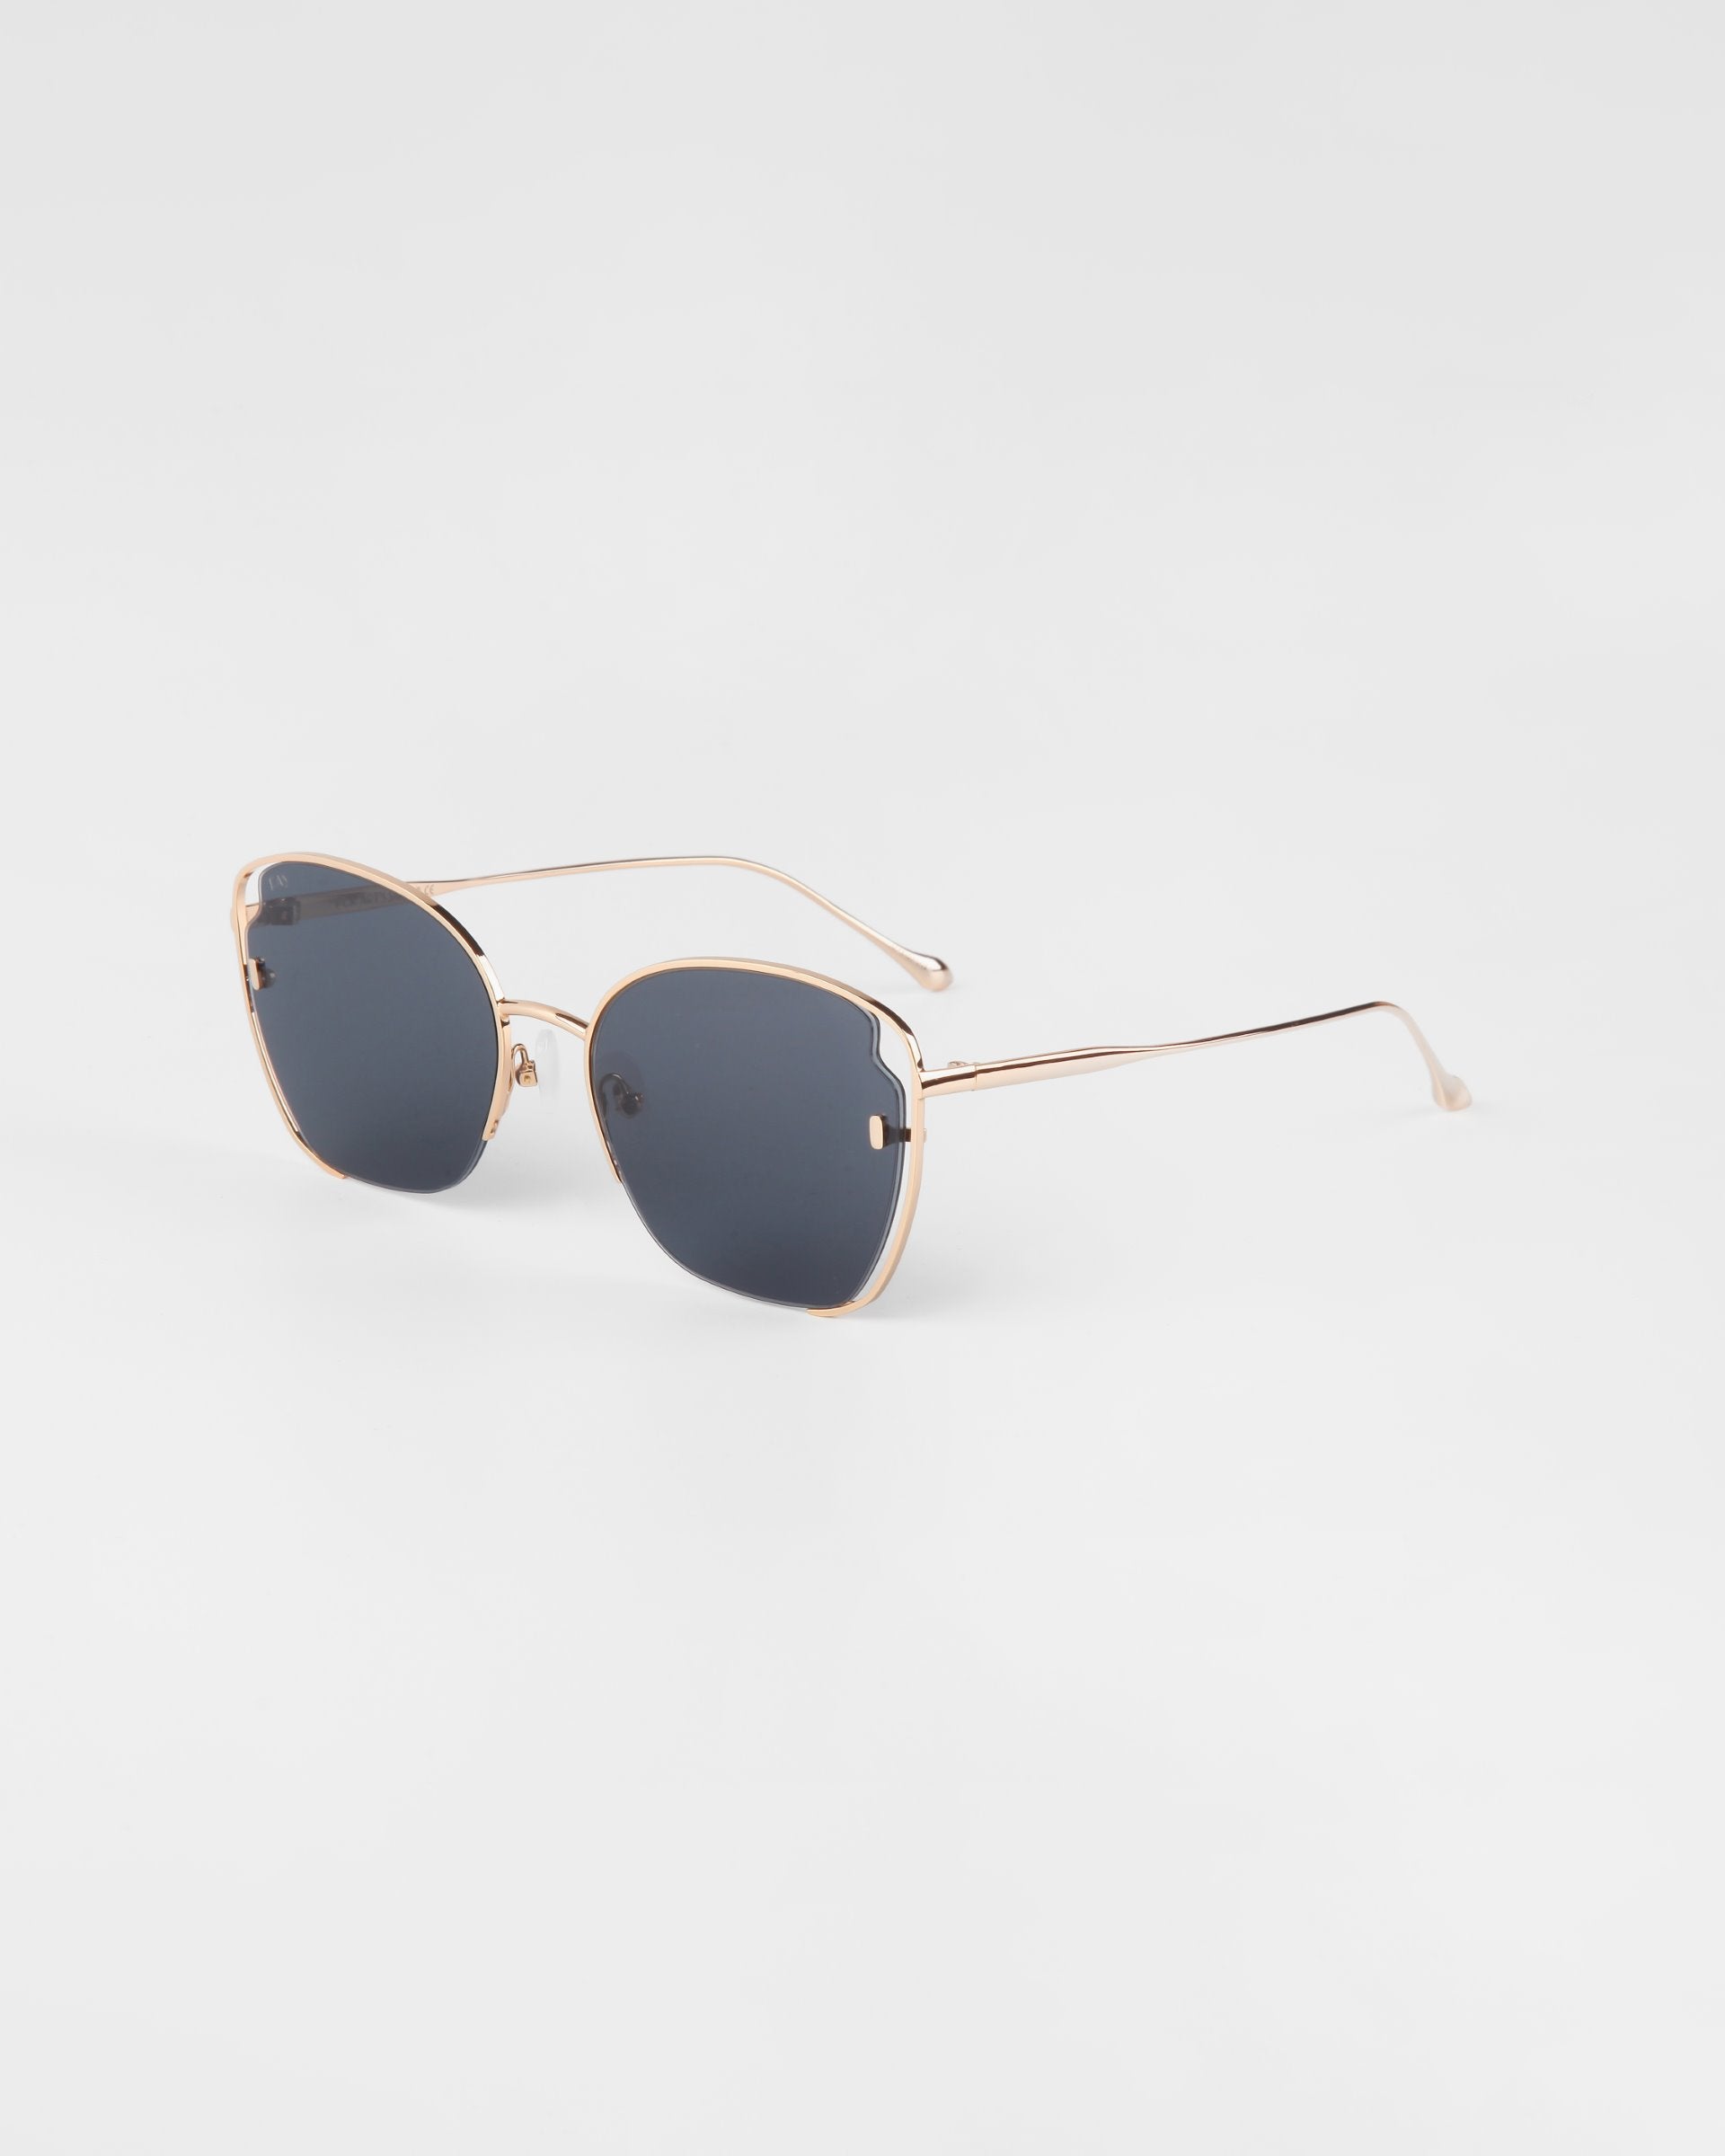 A pair of For Art's Sake® Eden sunglasses with 18-karat gold-plated frames and dark tinted lenses. The design features thin, elegant arms and a minimalistic yet modern aesthetic, set against a plain white background. Enjoy both style and protection with UVA & UVB-protected lenses.